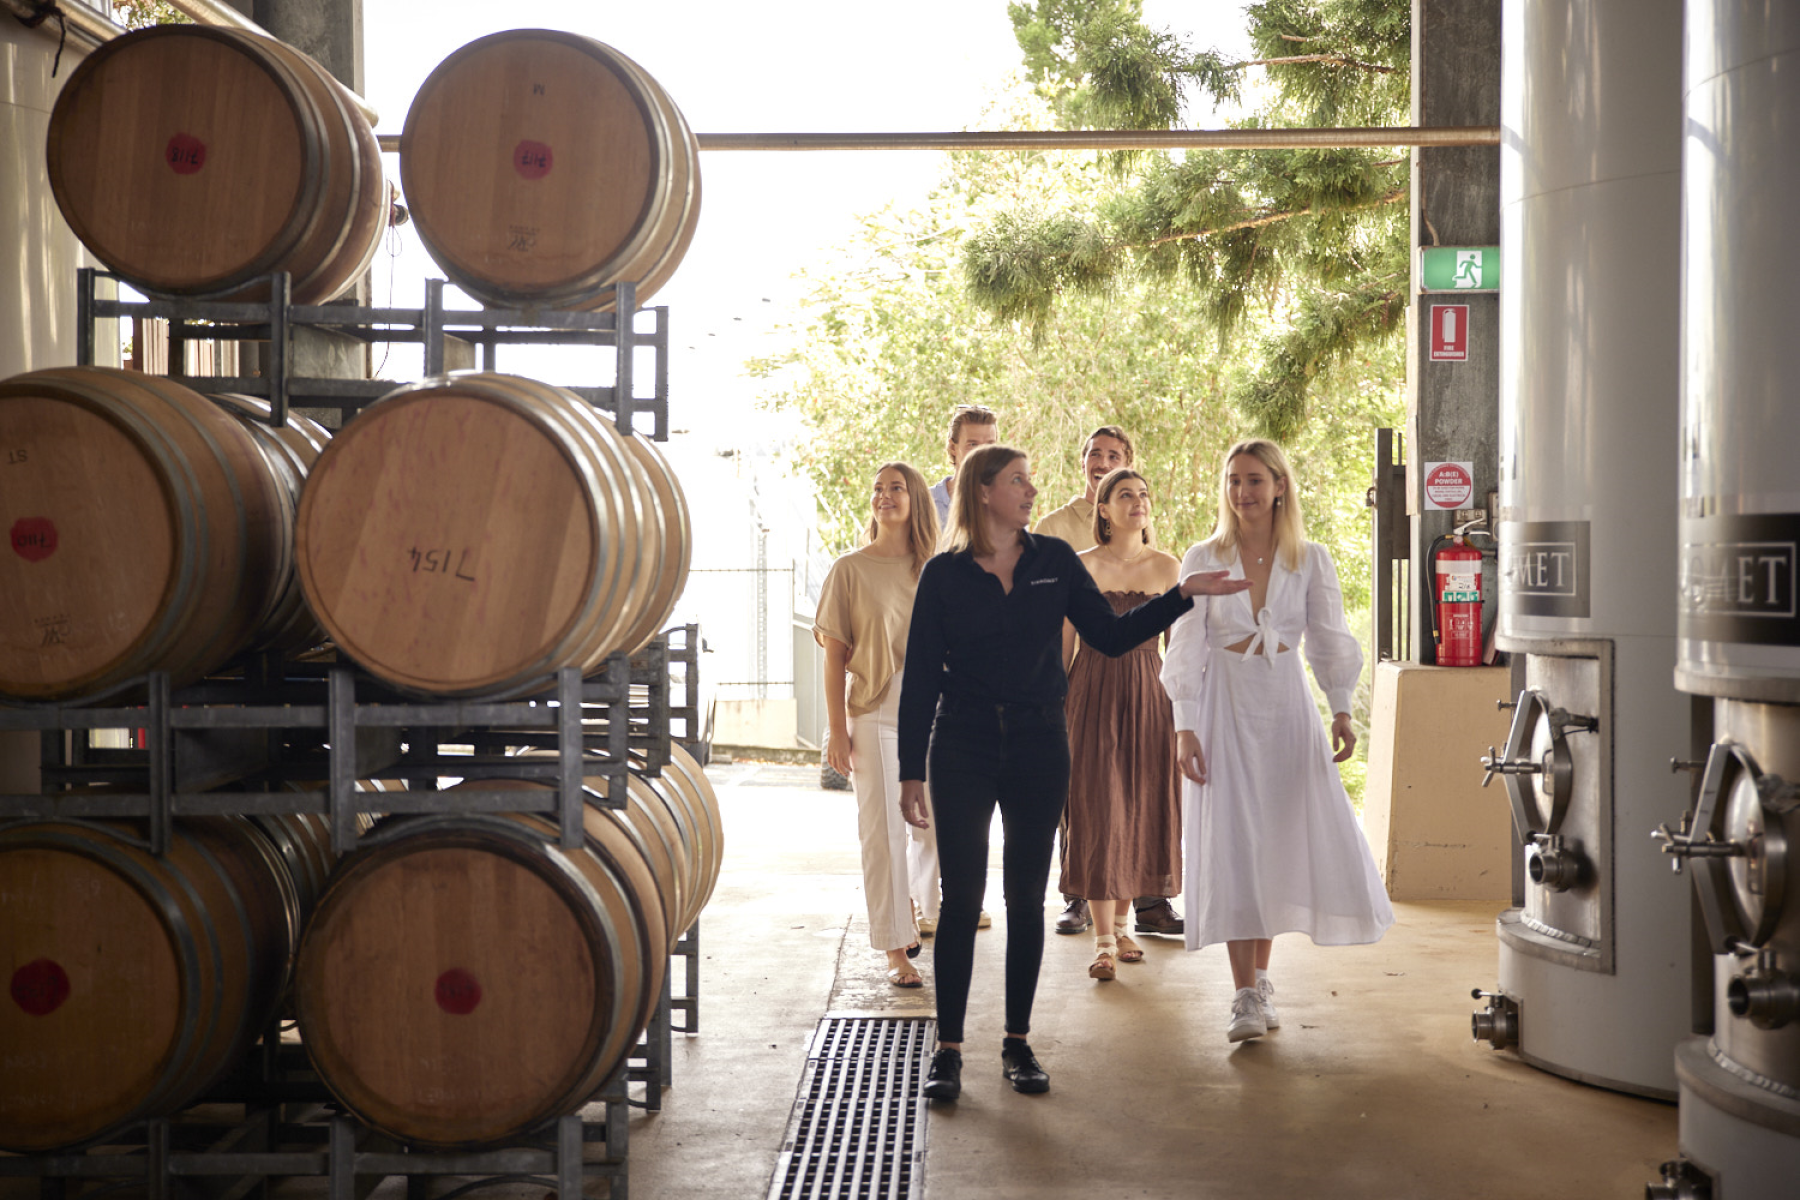 Woman giving tour of winery to a group of people 